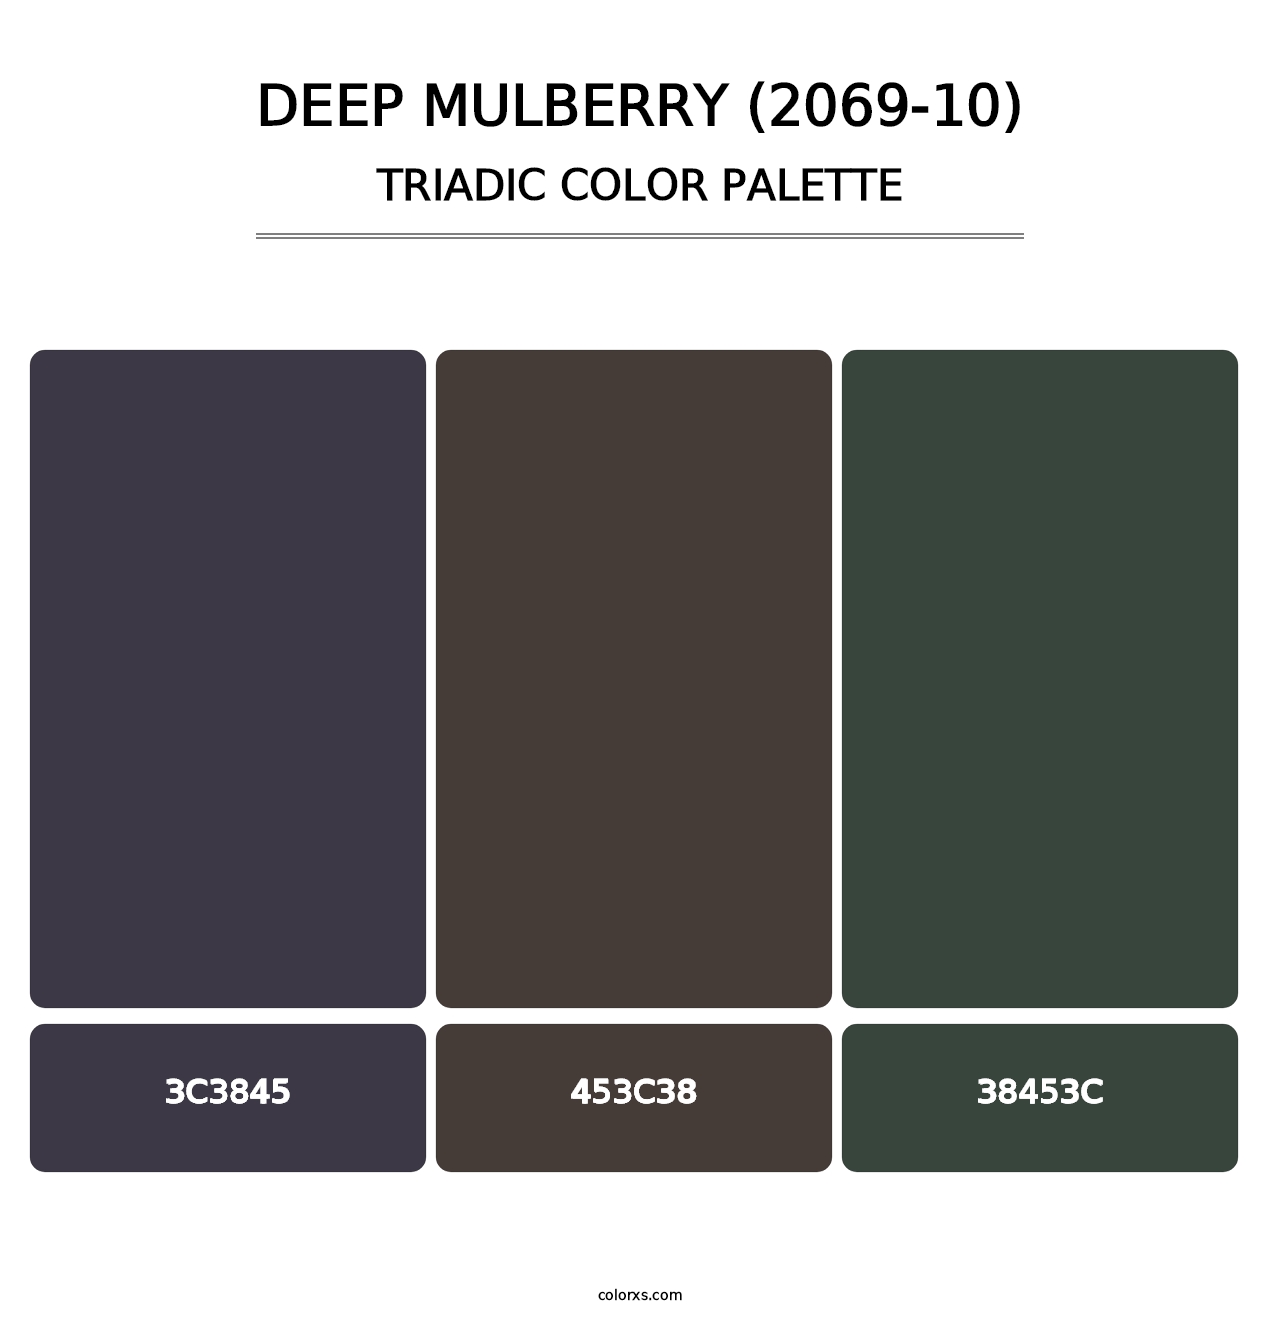 Deep Mulberry (2069-10) - Triadic Color Palette